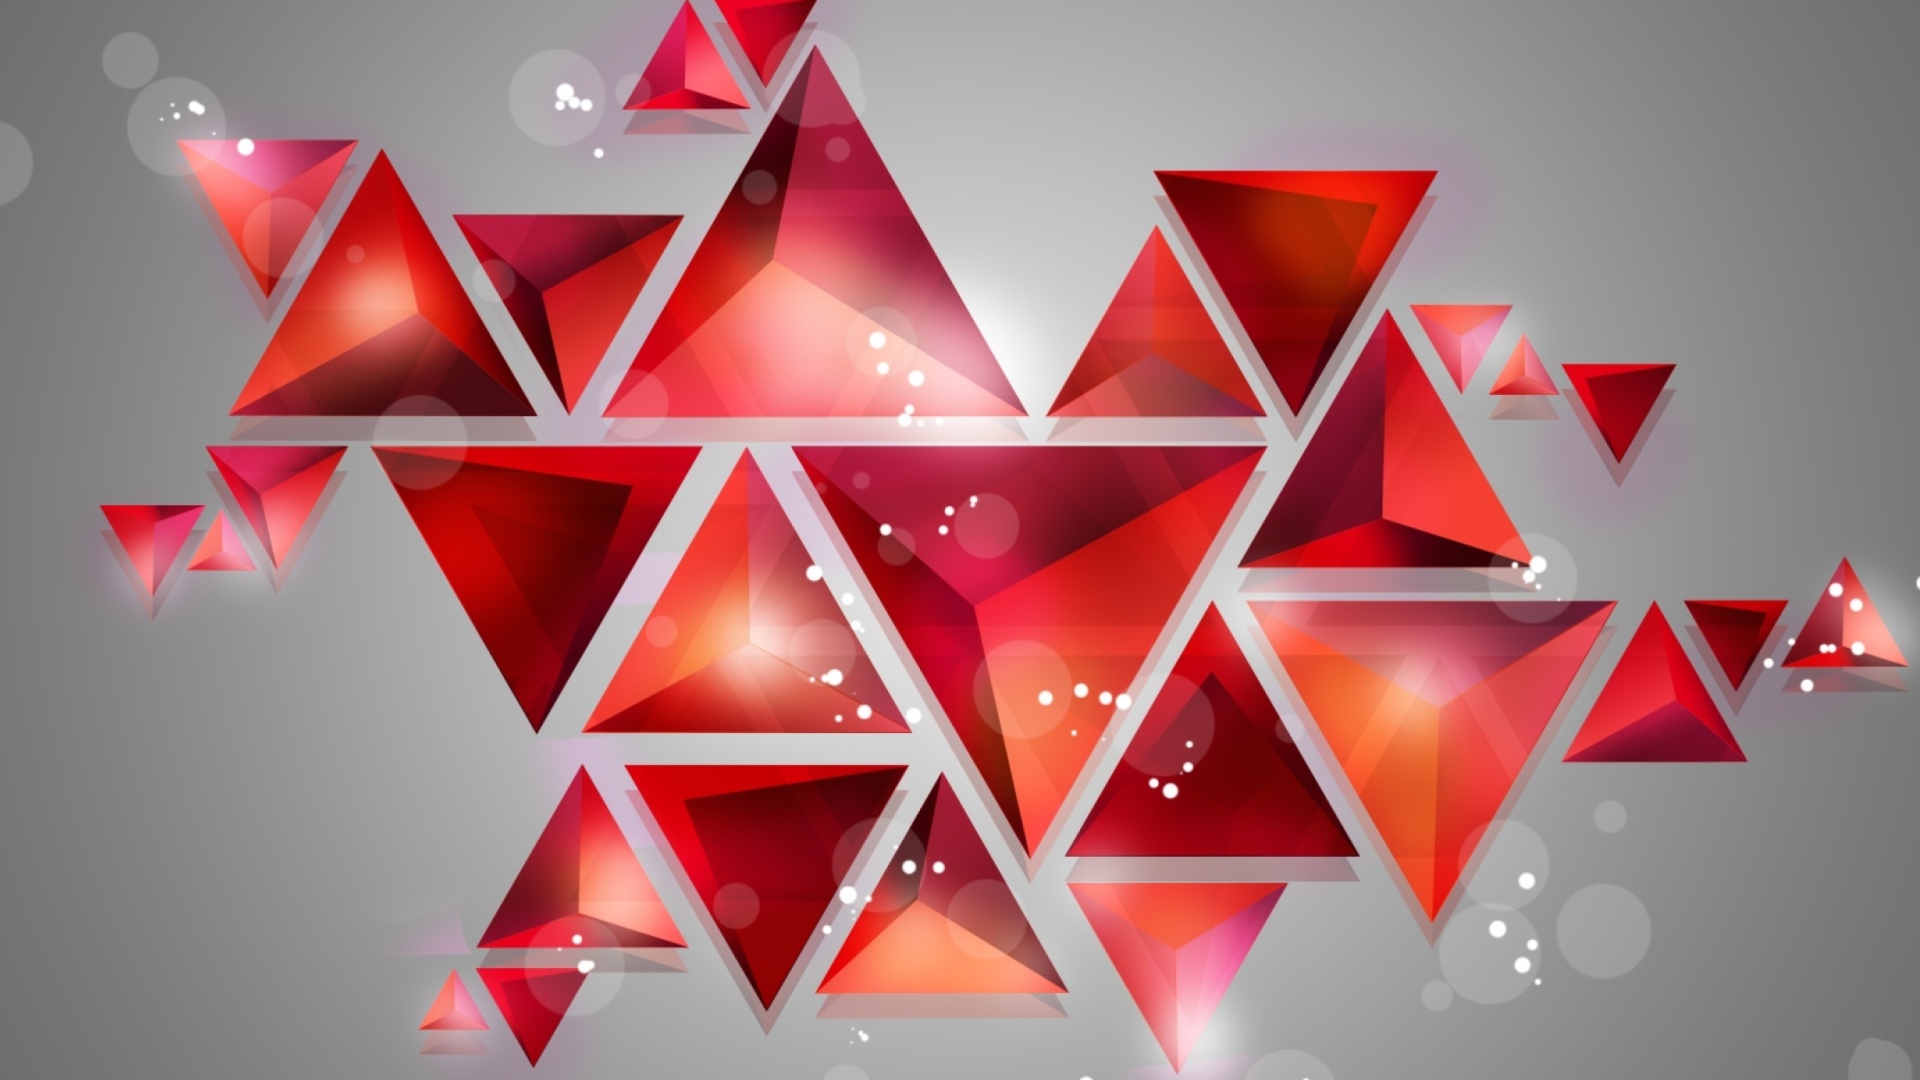 Geometry of red shades wallpaper 1920x1080